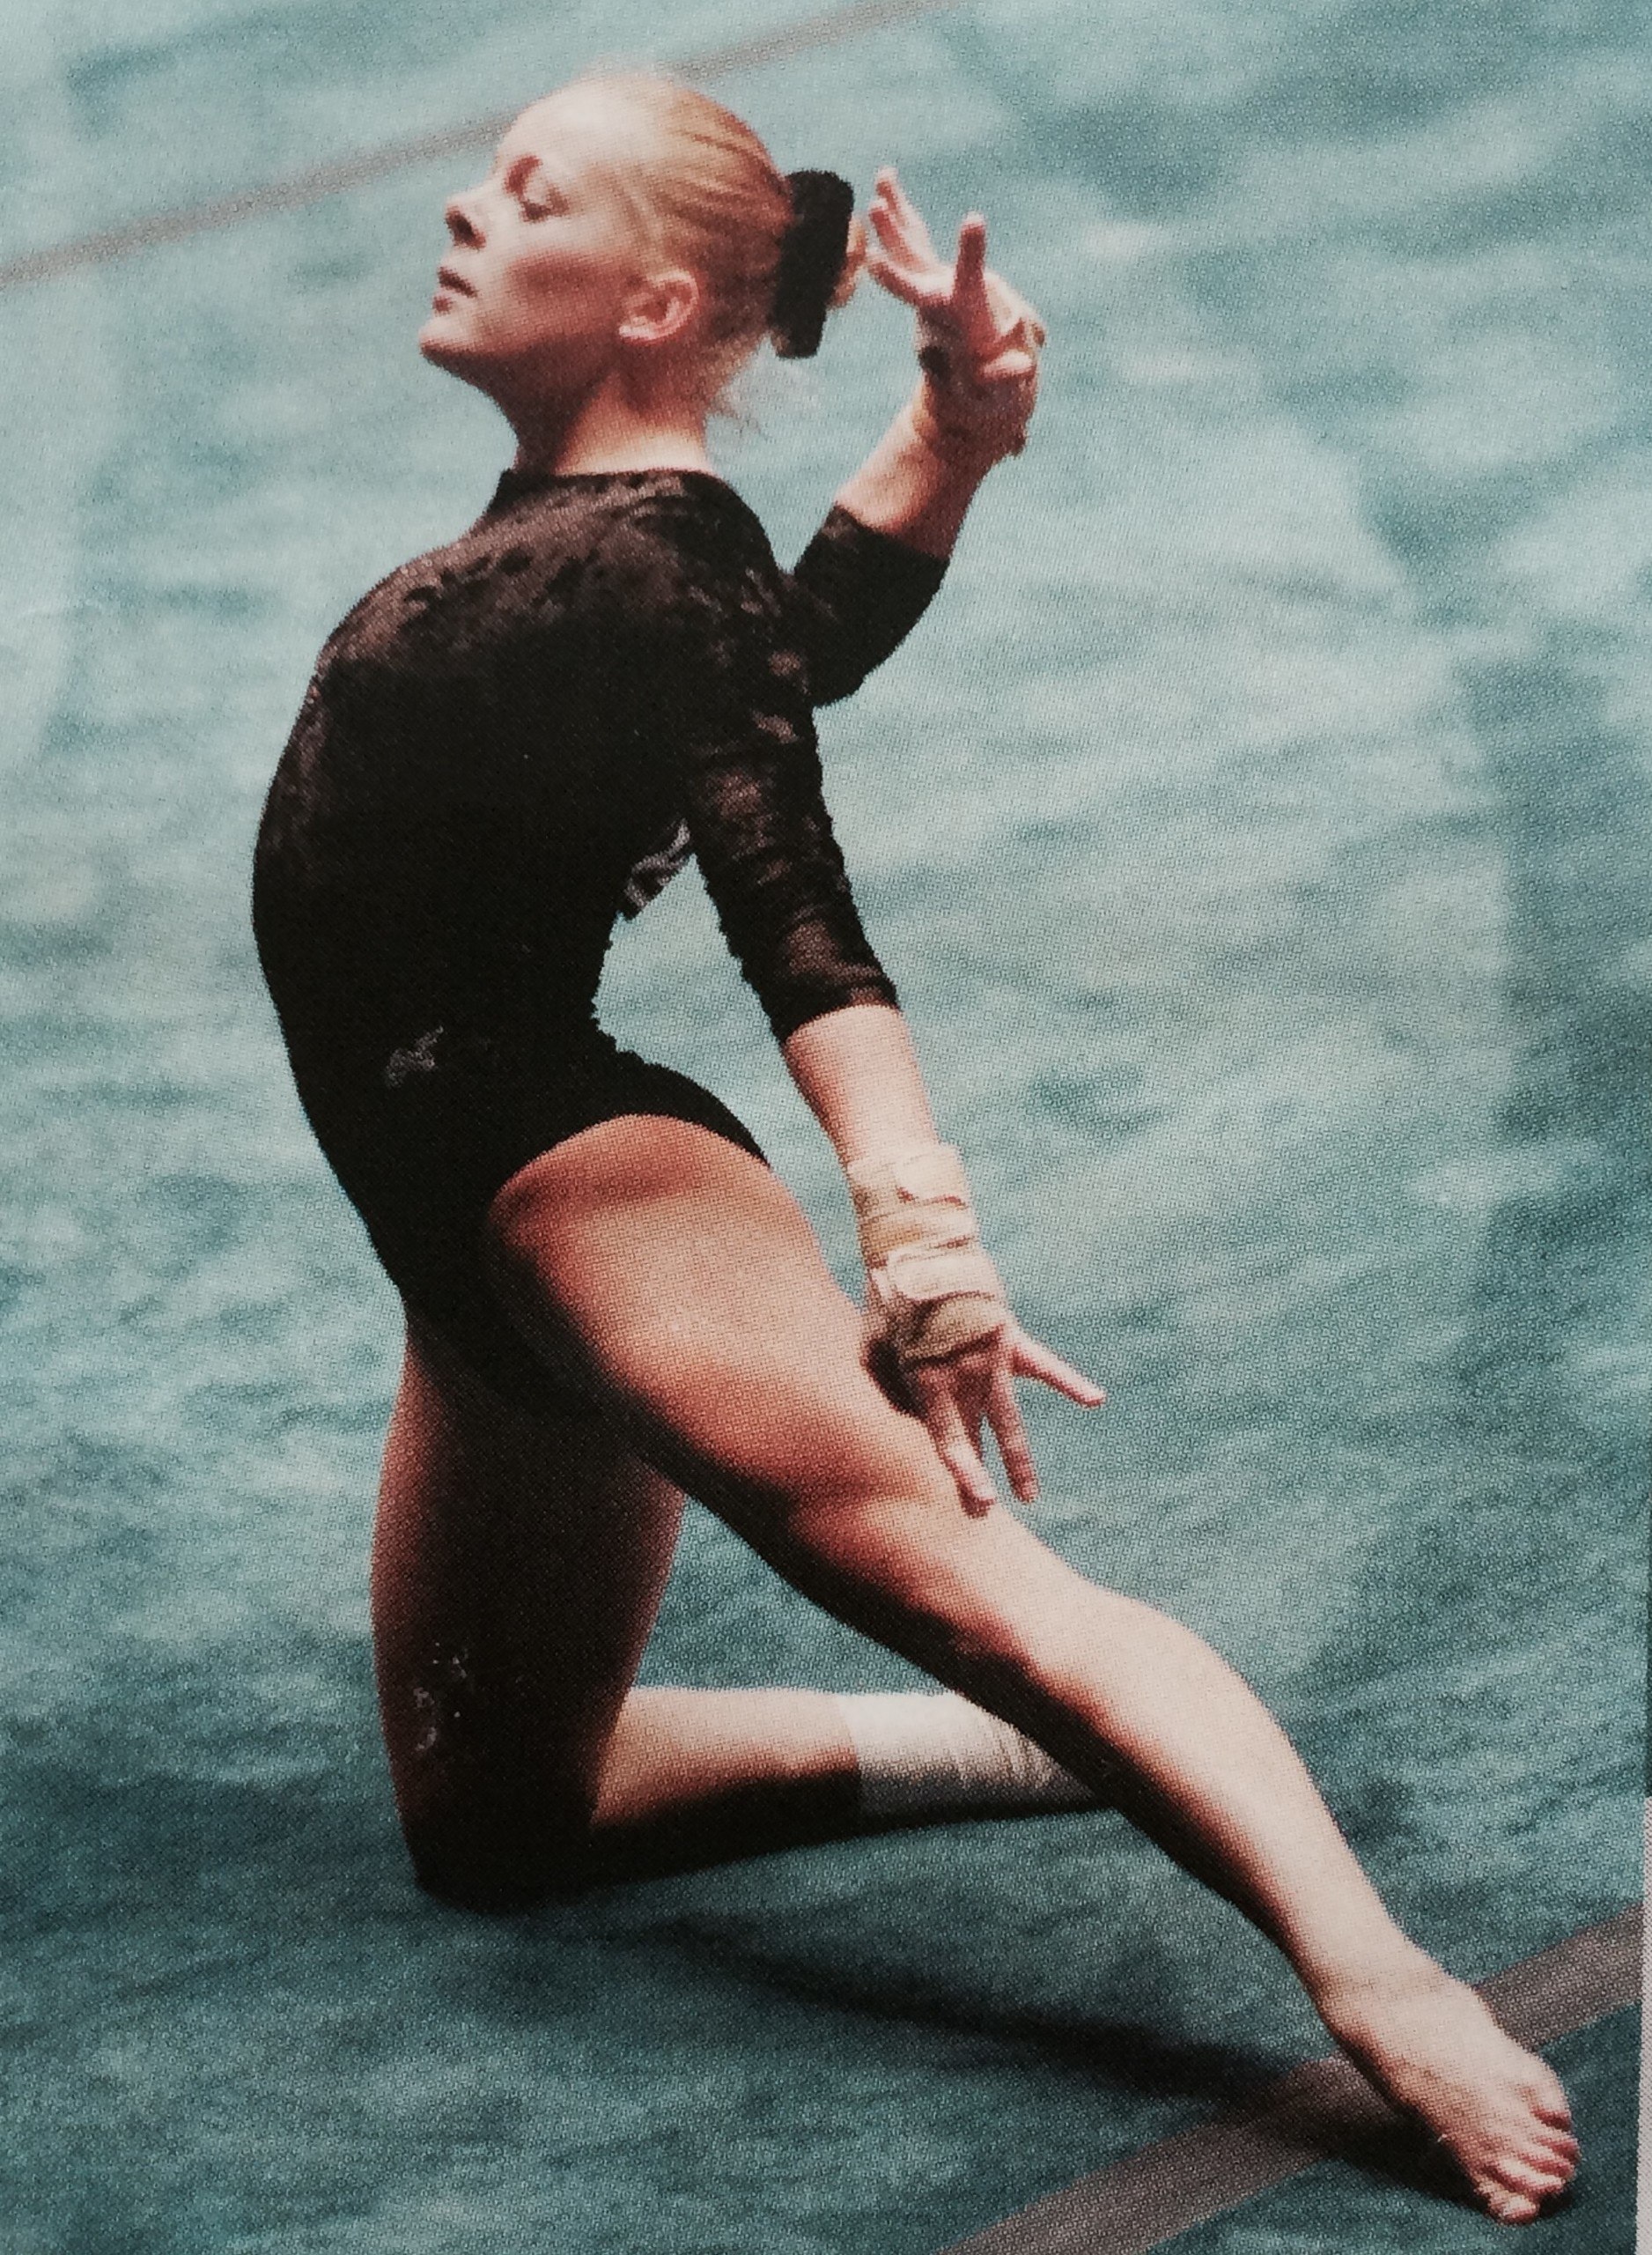 A gymnast during a floor exercise routine.